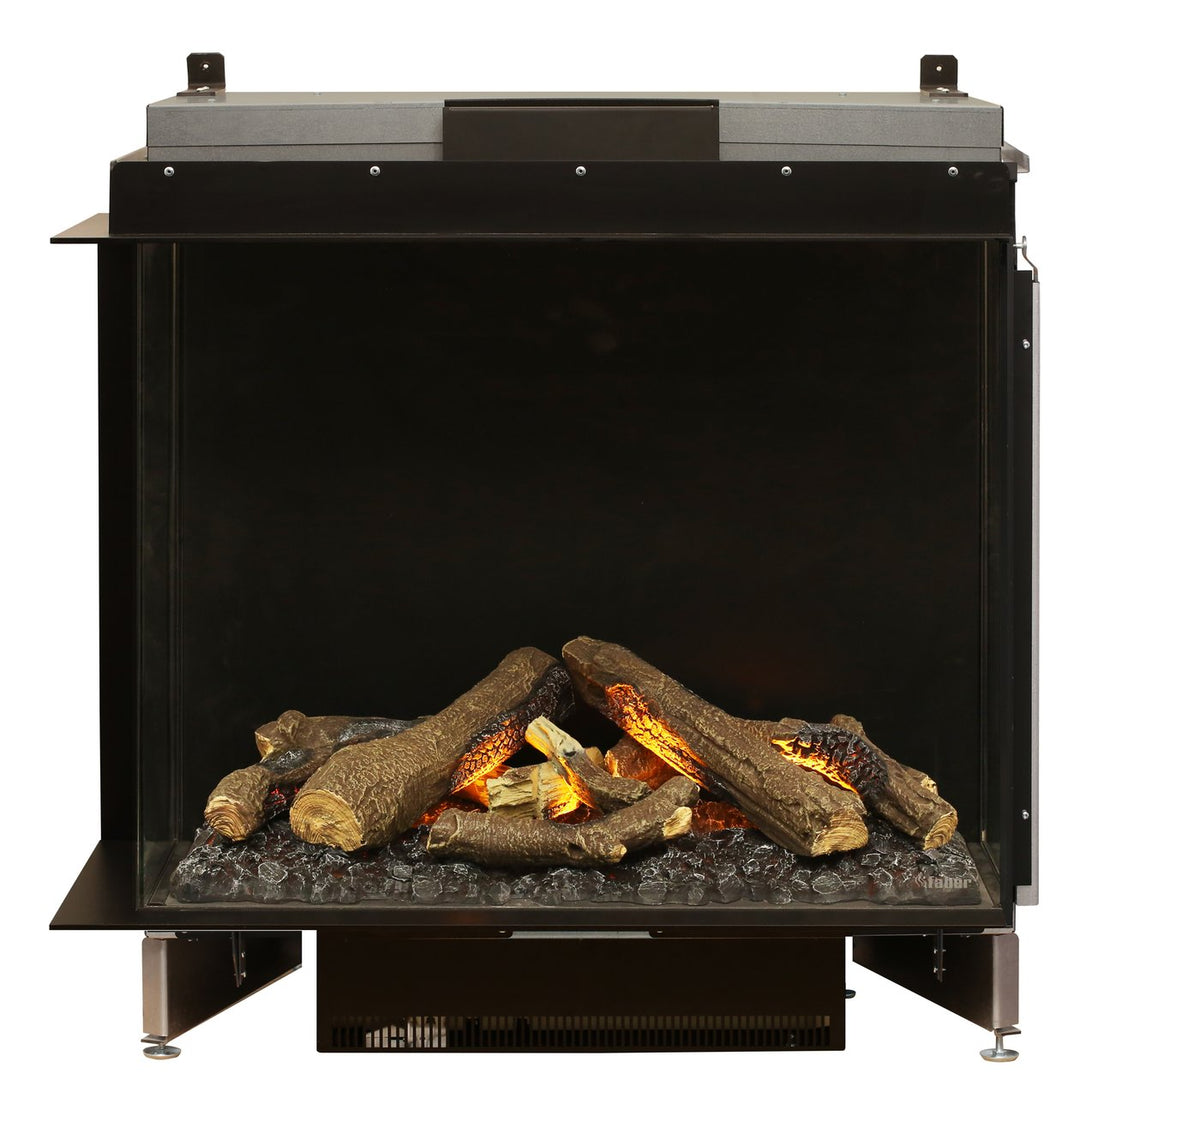 Dimplex e-MatriX Two-Sided Built-in Water Vapor Electric Fireplace